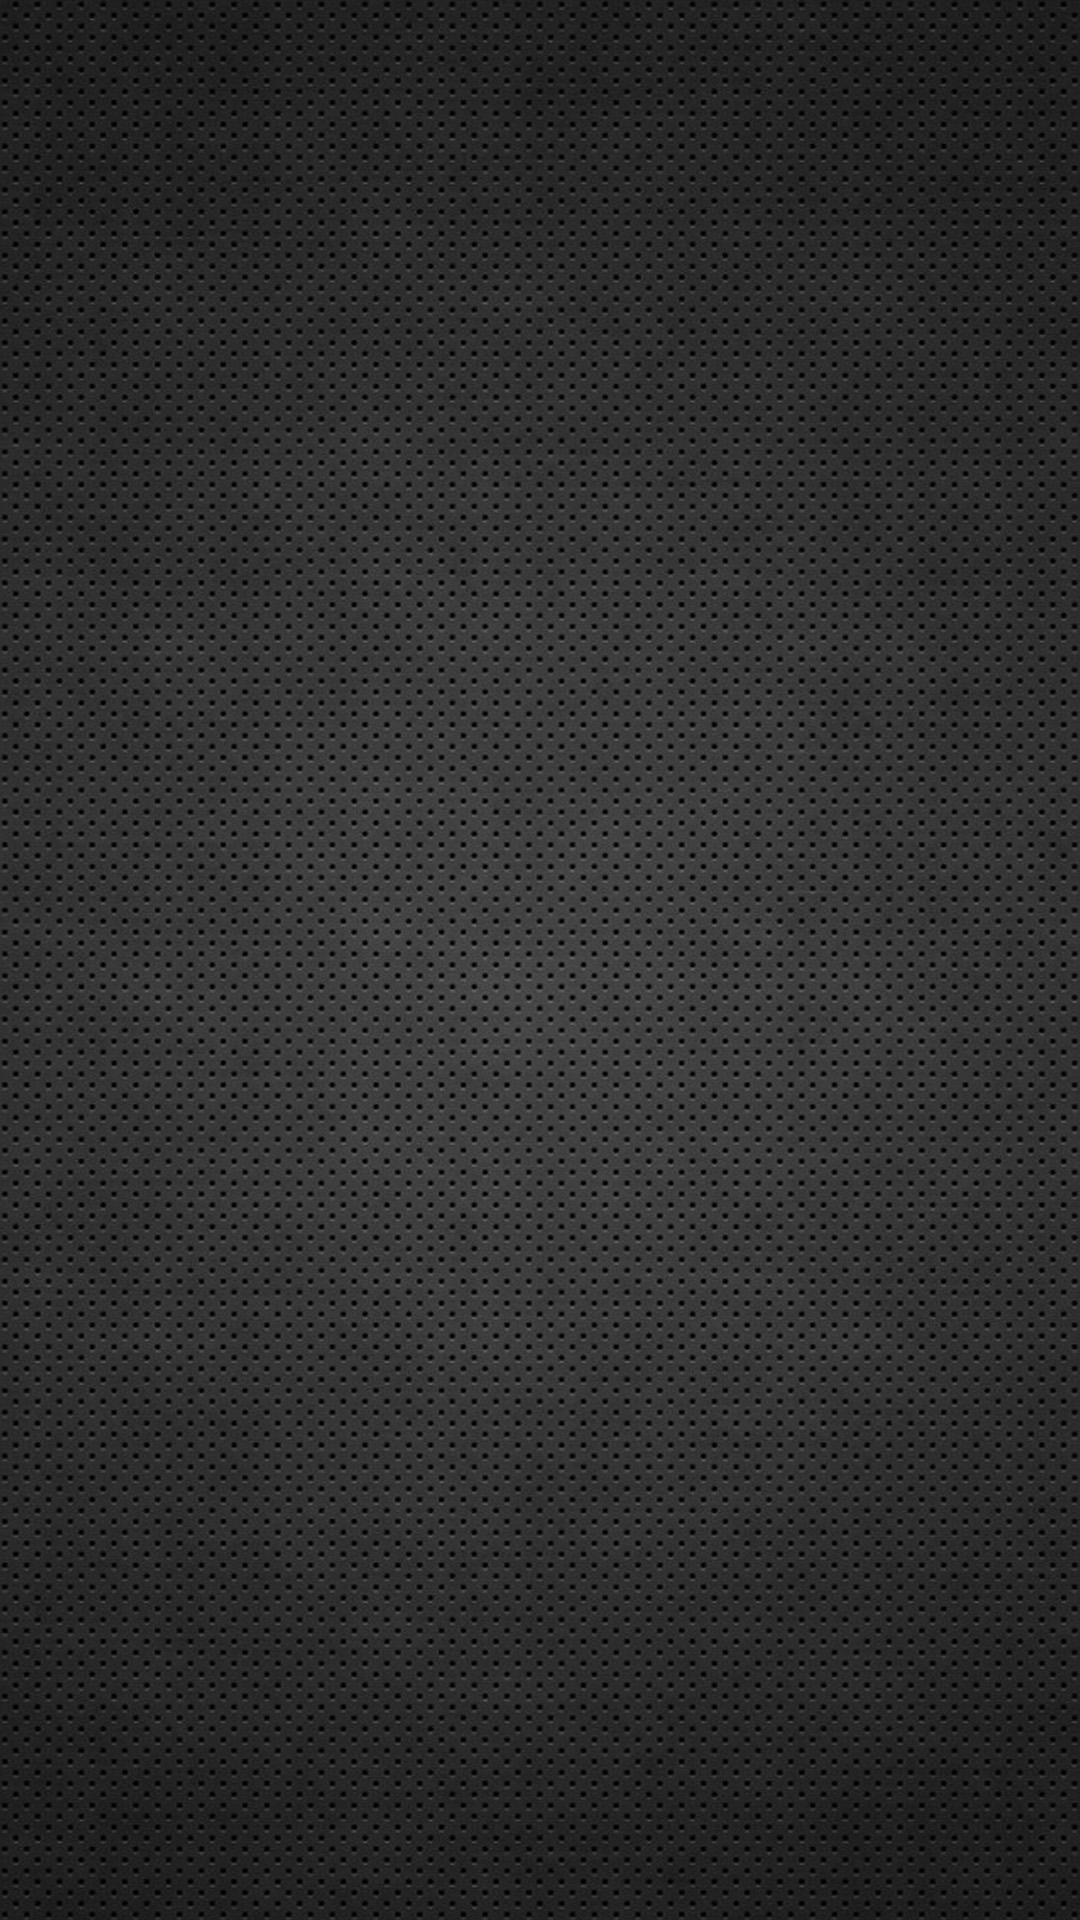 HD Texture LG G2 Wallpapers